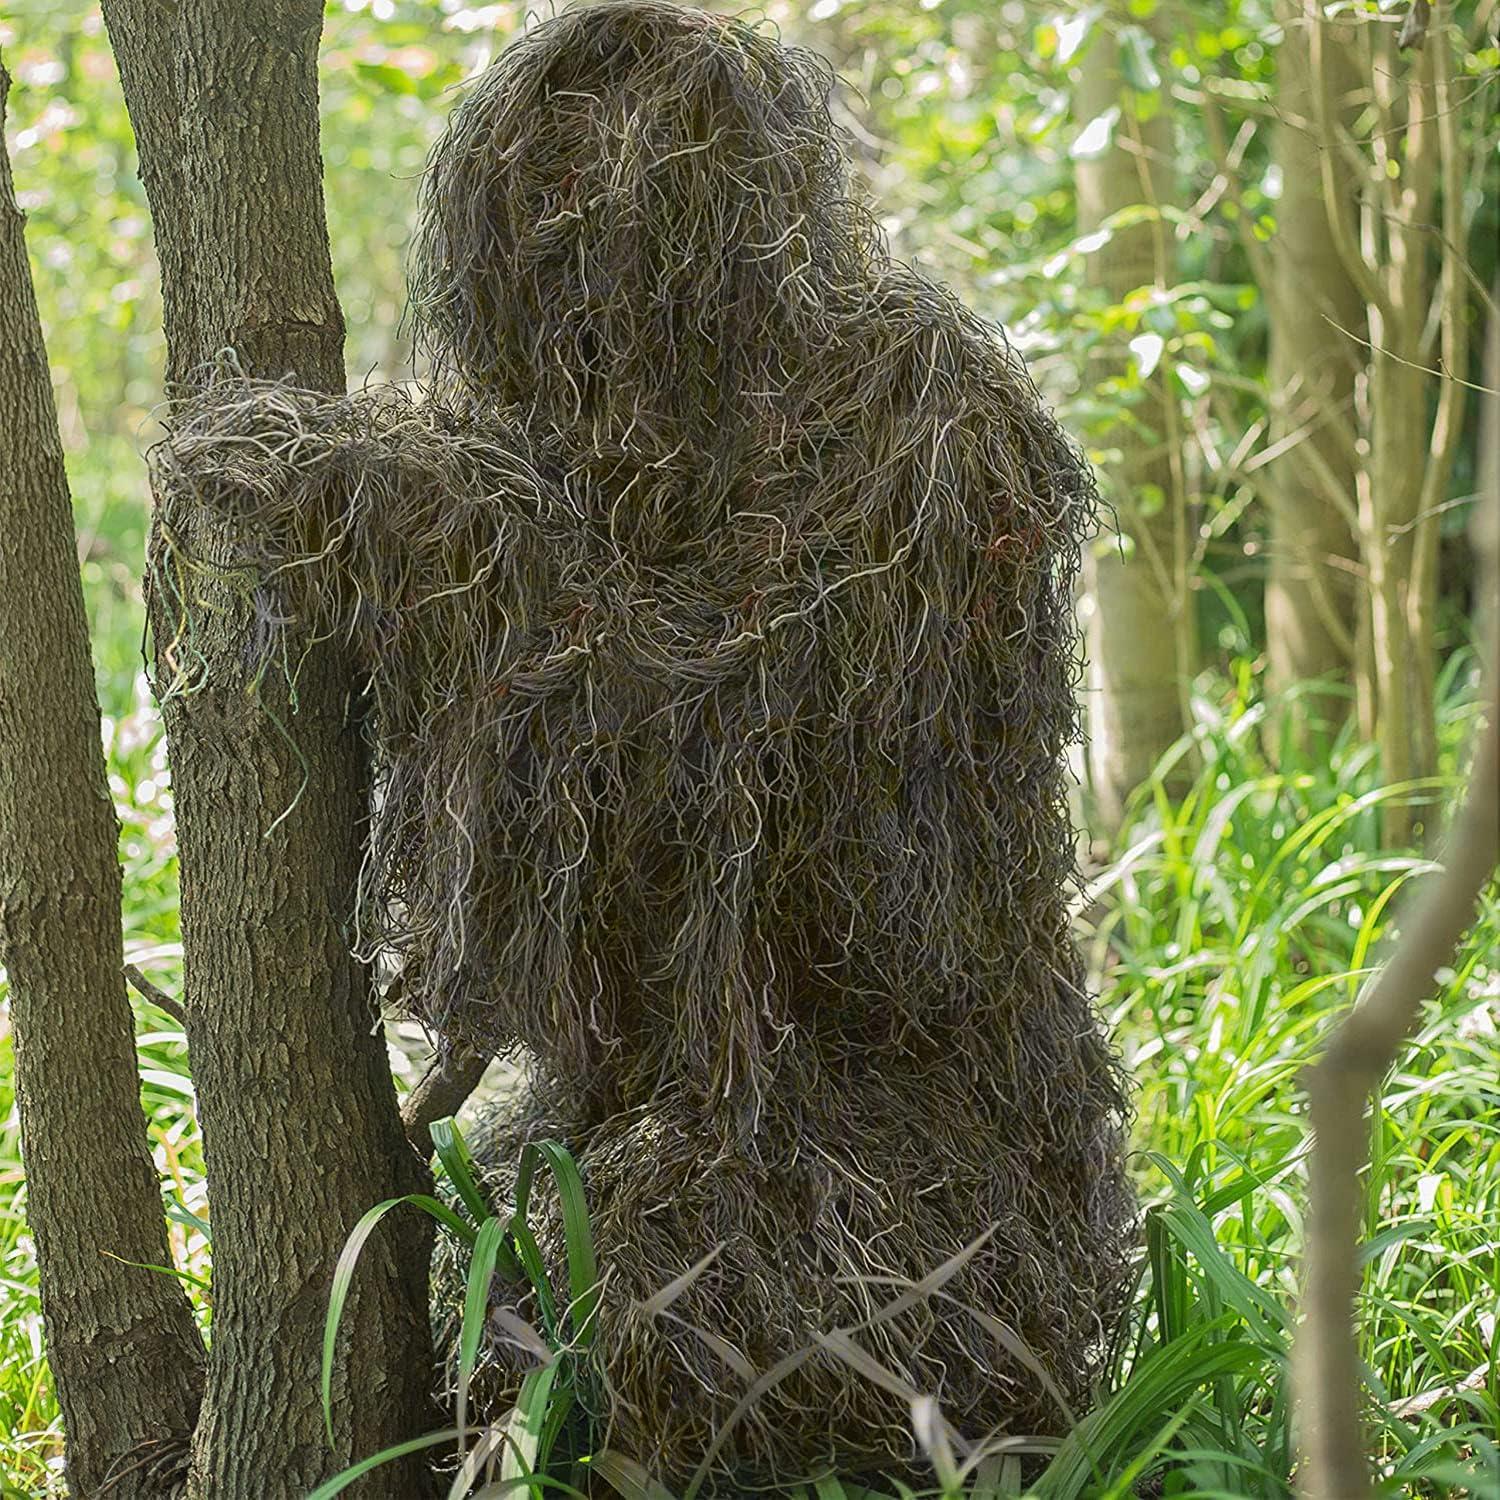 Slendor 6 in 1 Ghillie Suit, 3D Camouflage Hunting Apparel Camo Hunting ...